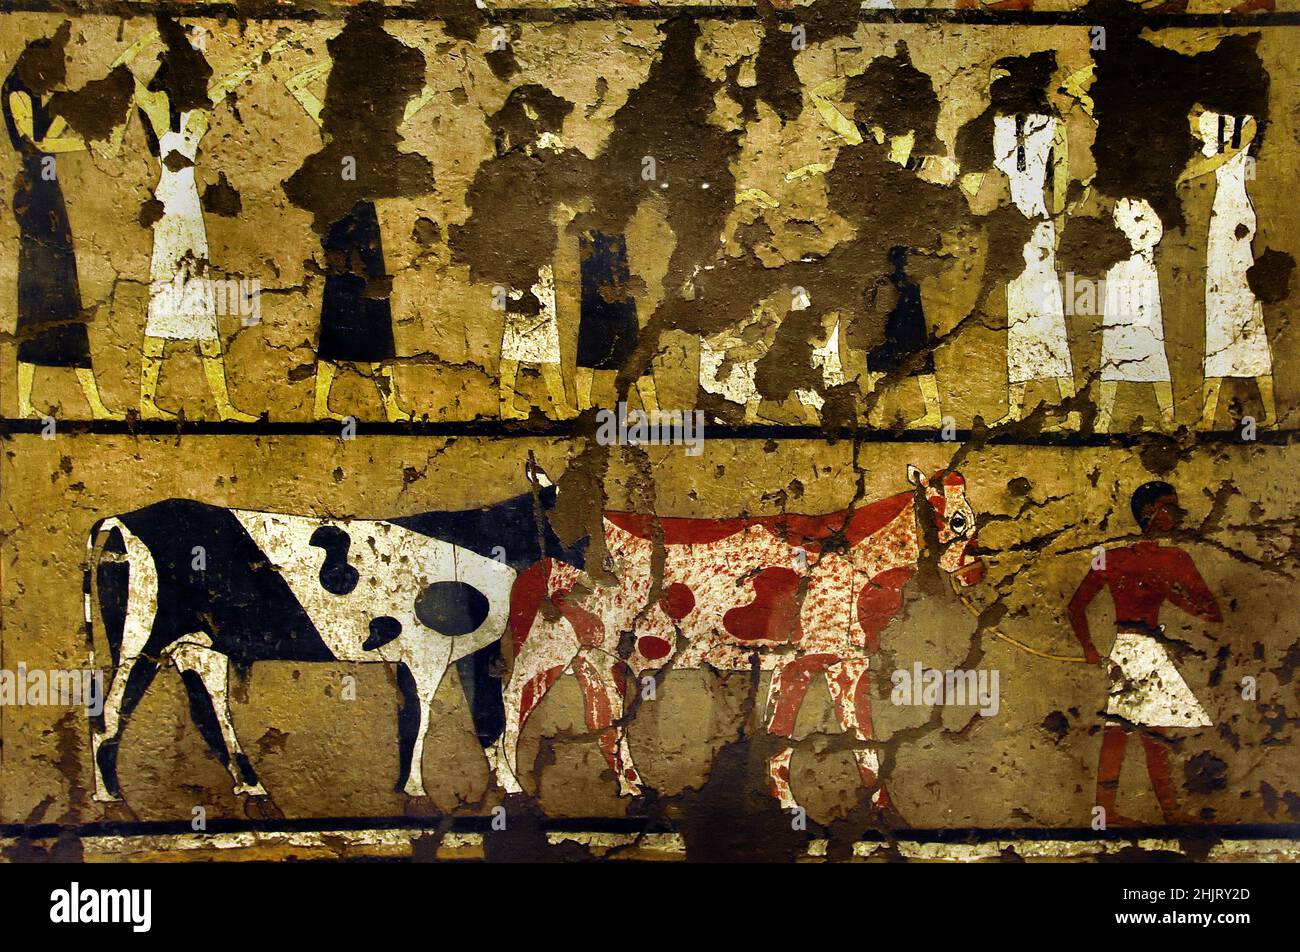 Upper part Mourning Scene, Funerary lamentation - Bottom part  cattle driver with two oxen, Thebes, Tempera painting, First Intermediate Period, Gebelein,Tomb Of Iti and Neferu ( 2118-1980 BC )  Egypt (Museo Egizio di Torino Italy) Stock Photo